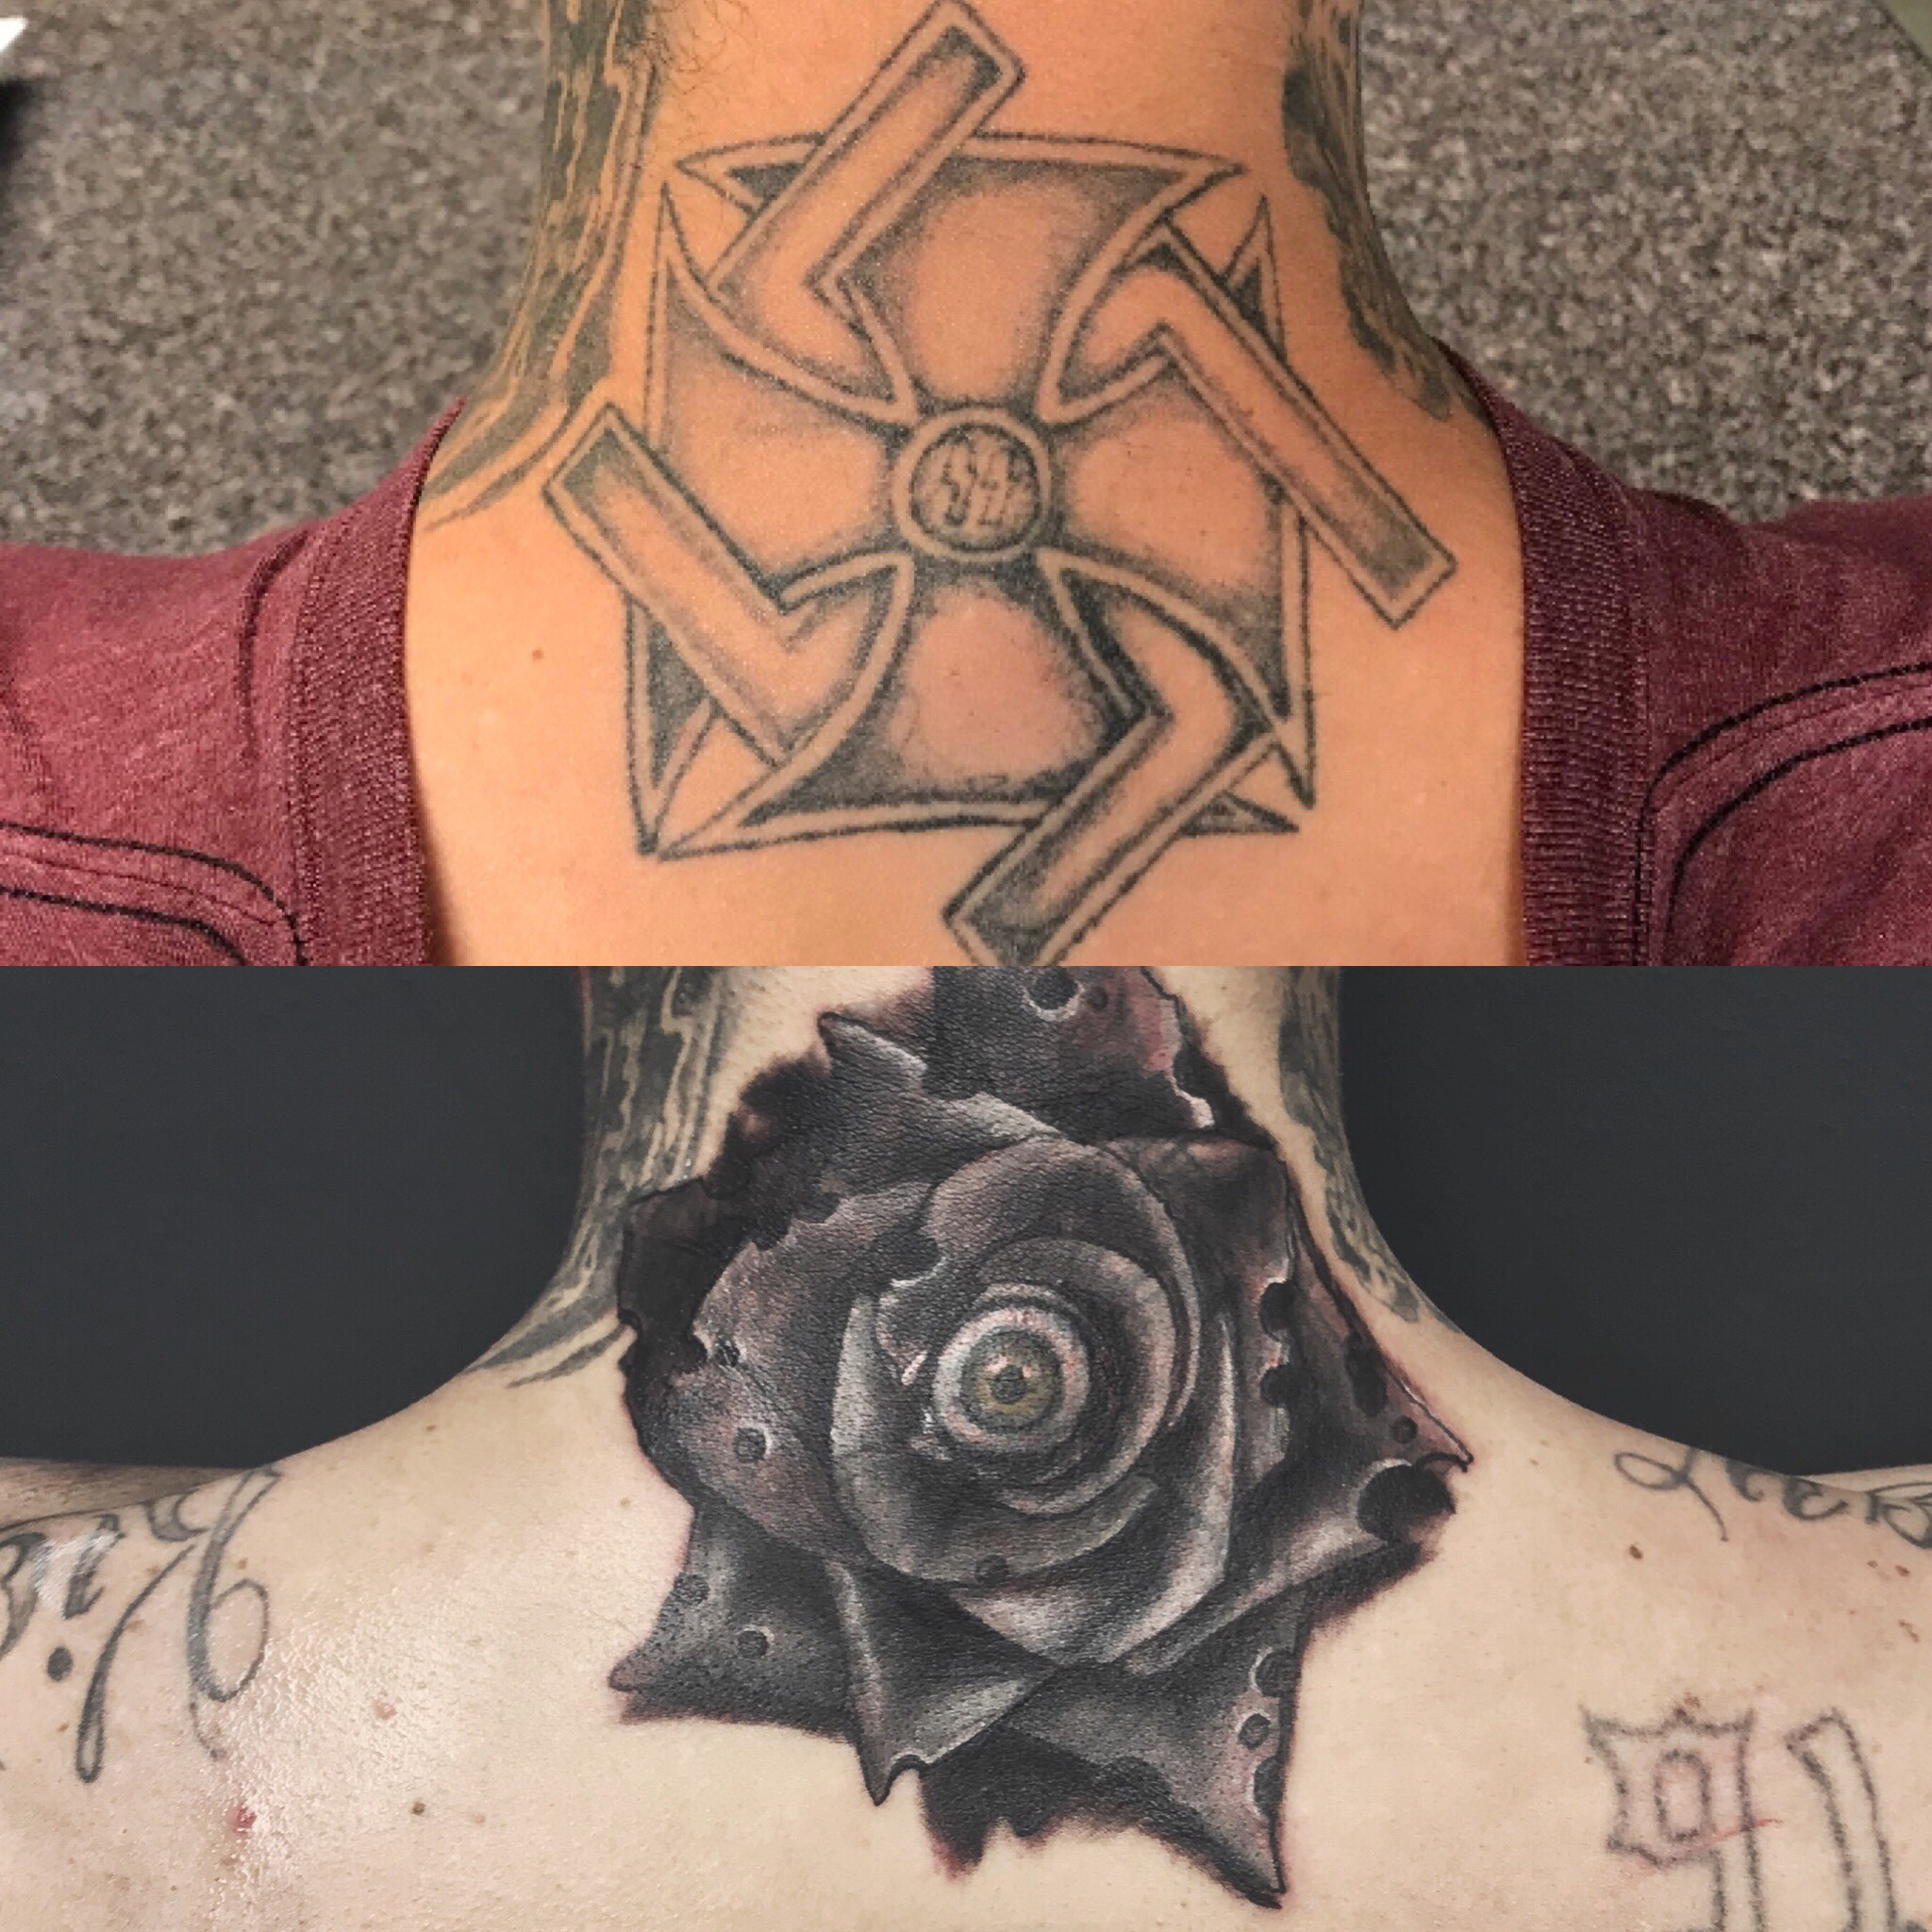 Tattoo Uploaded Justin Fleetwood A Swastikairon Cross Cover Up throughout size 2048 X 2048